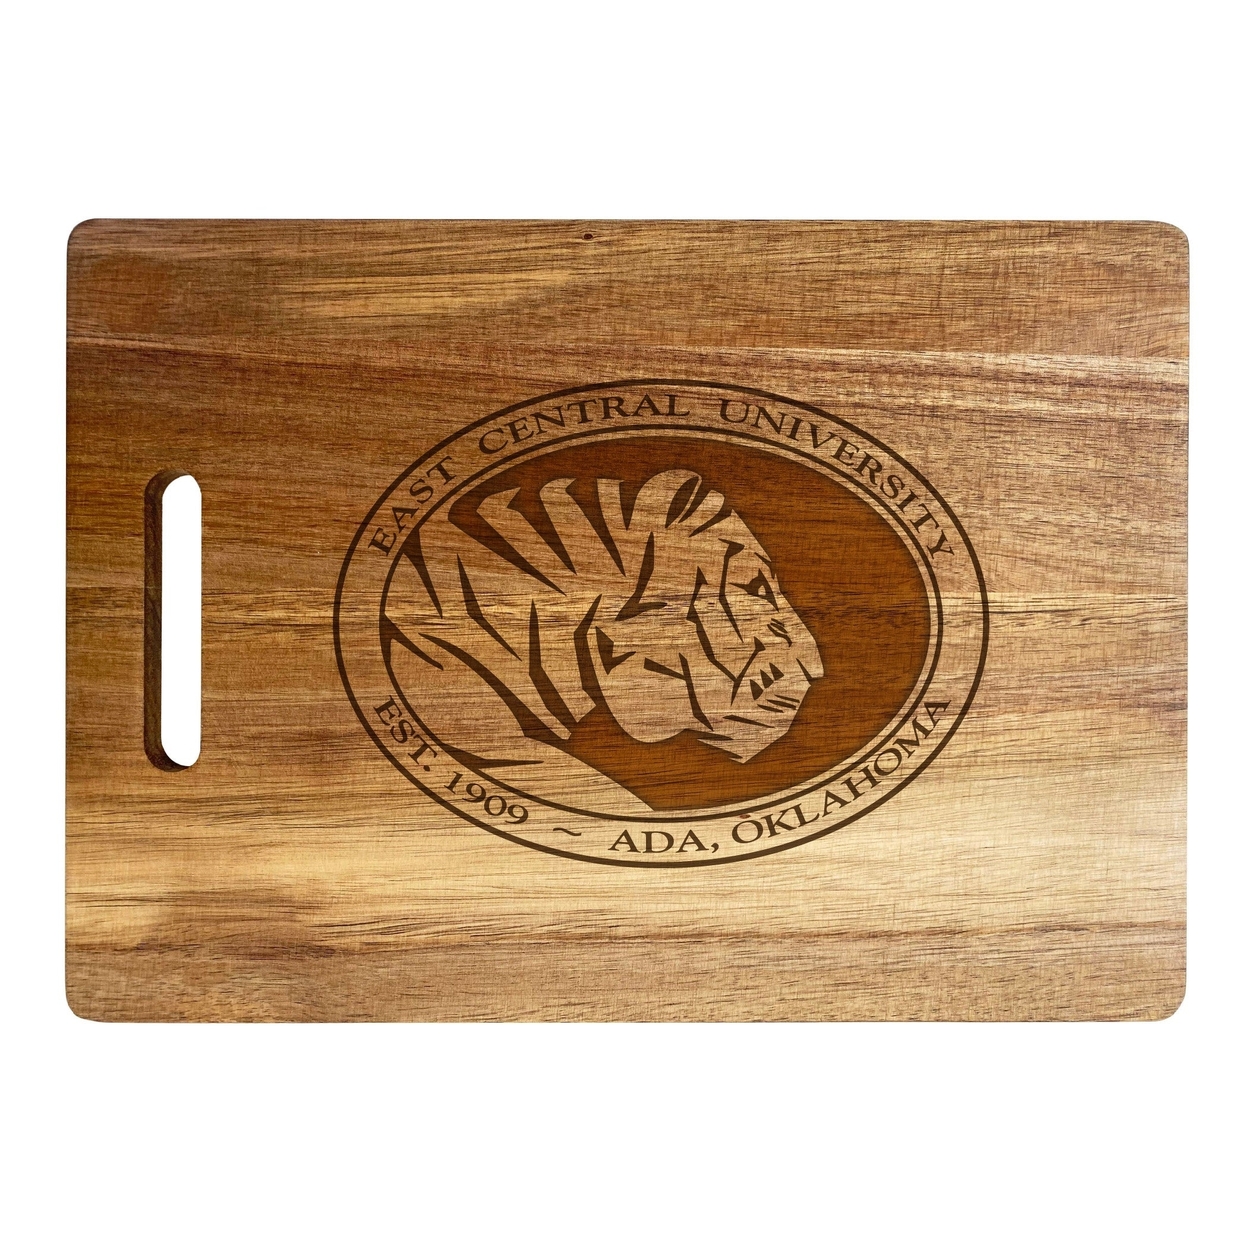 East Central University Tigers Engraved Wooden Cutting Board 10 X 14 Acacia Wood - Large Engraving